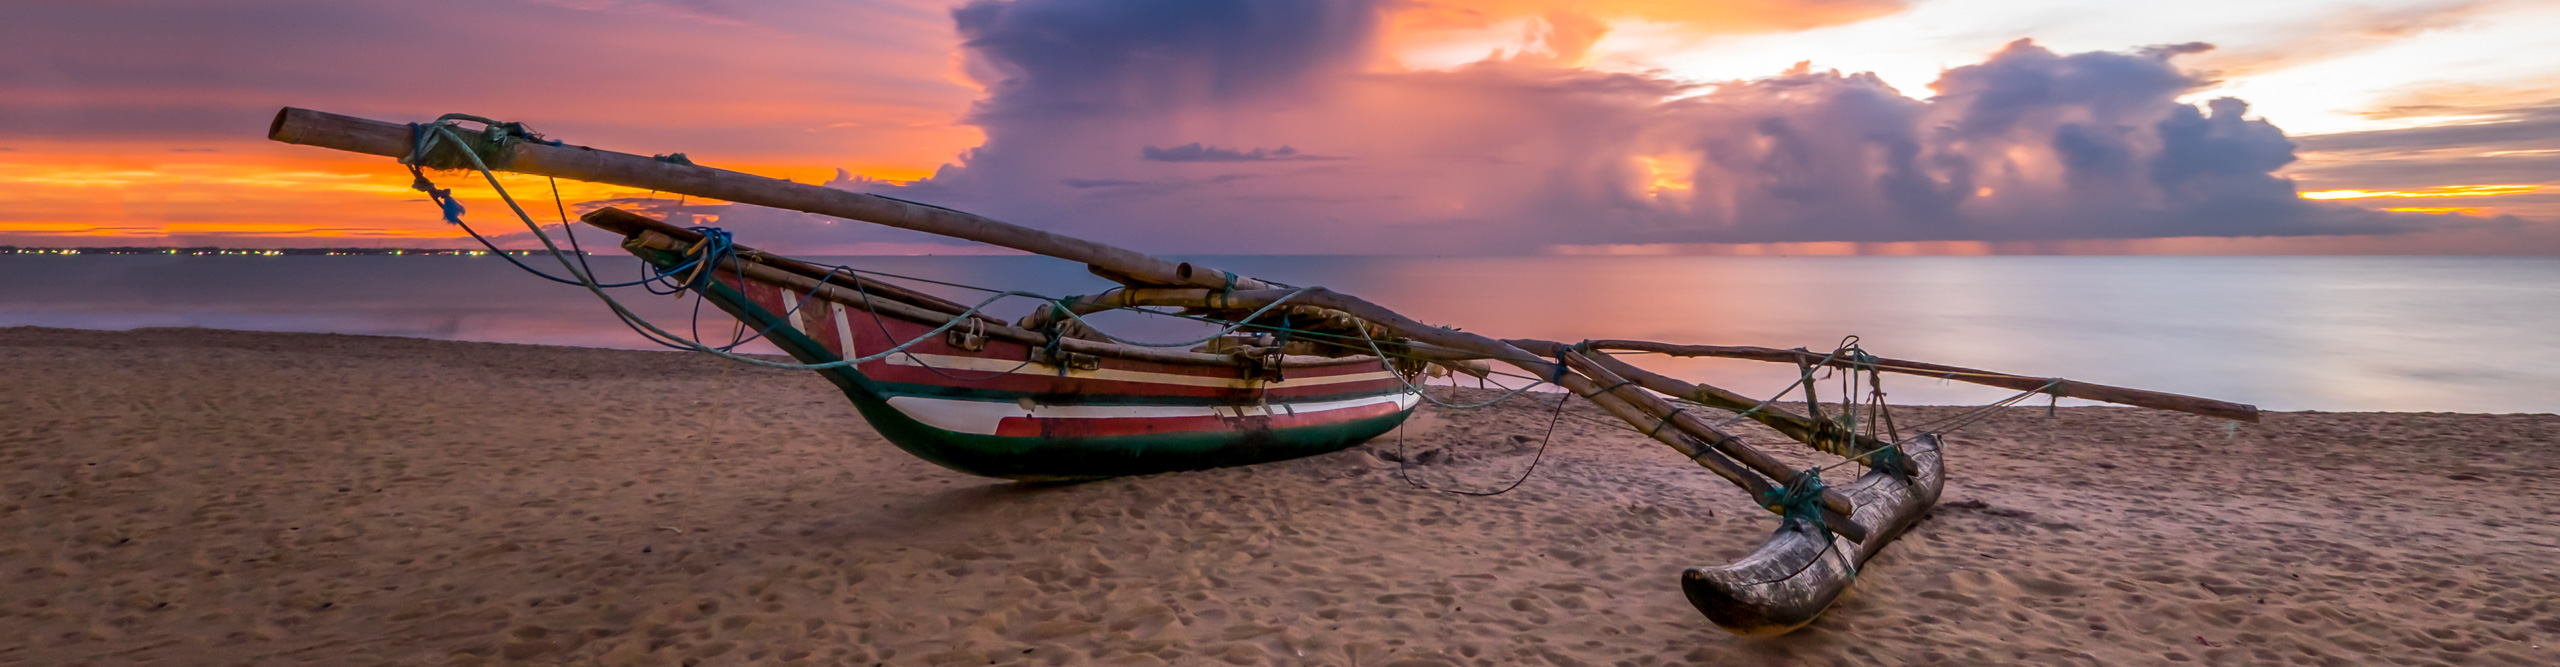 Traditional wooden fishing boat on the beach at sunset with a bluey pink sky in Negombo, Sri Lanka